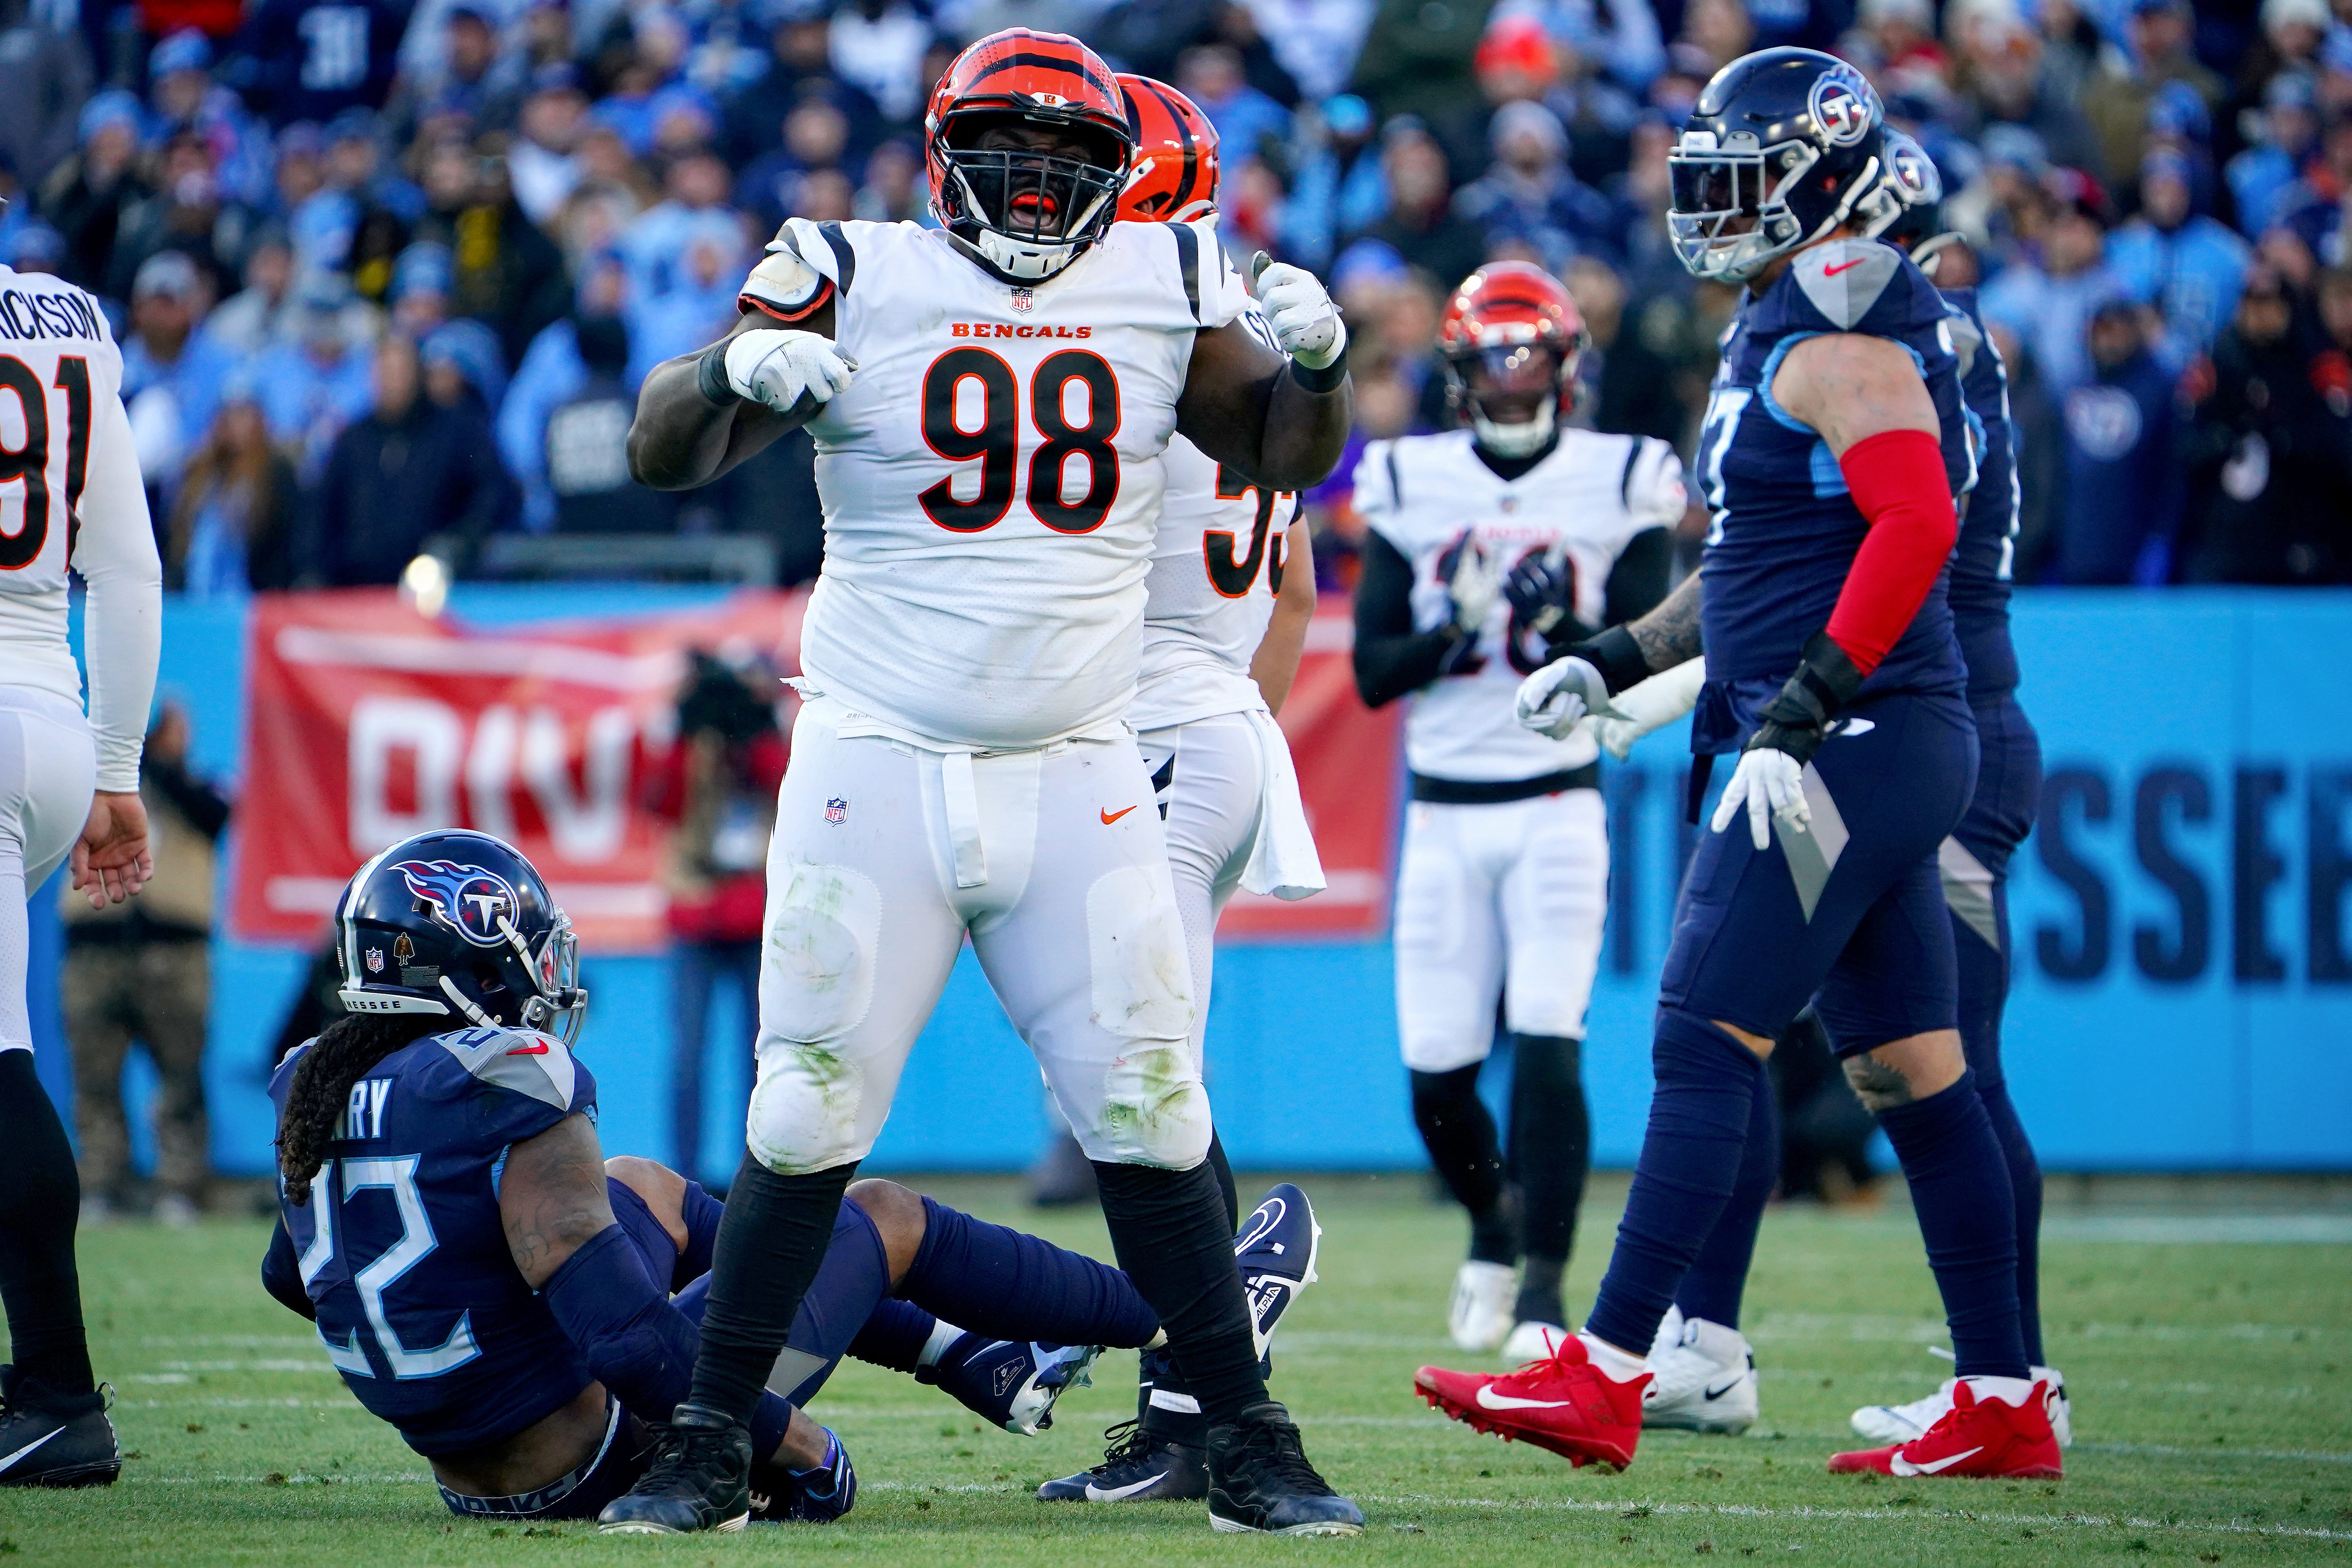 Cincinnati Bengals nose tackle D.J. Reader (98) celebrates a tackle of Tennessee Titans running back Derrick Henry (22), background, in the first quarter during an NFL divisional playoff football game, Saturday, Jan. 22, 2022, at Nissan Stadium in Nashville.